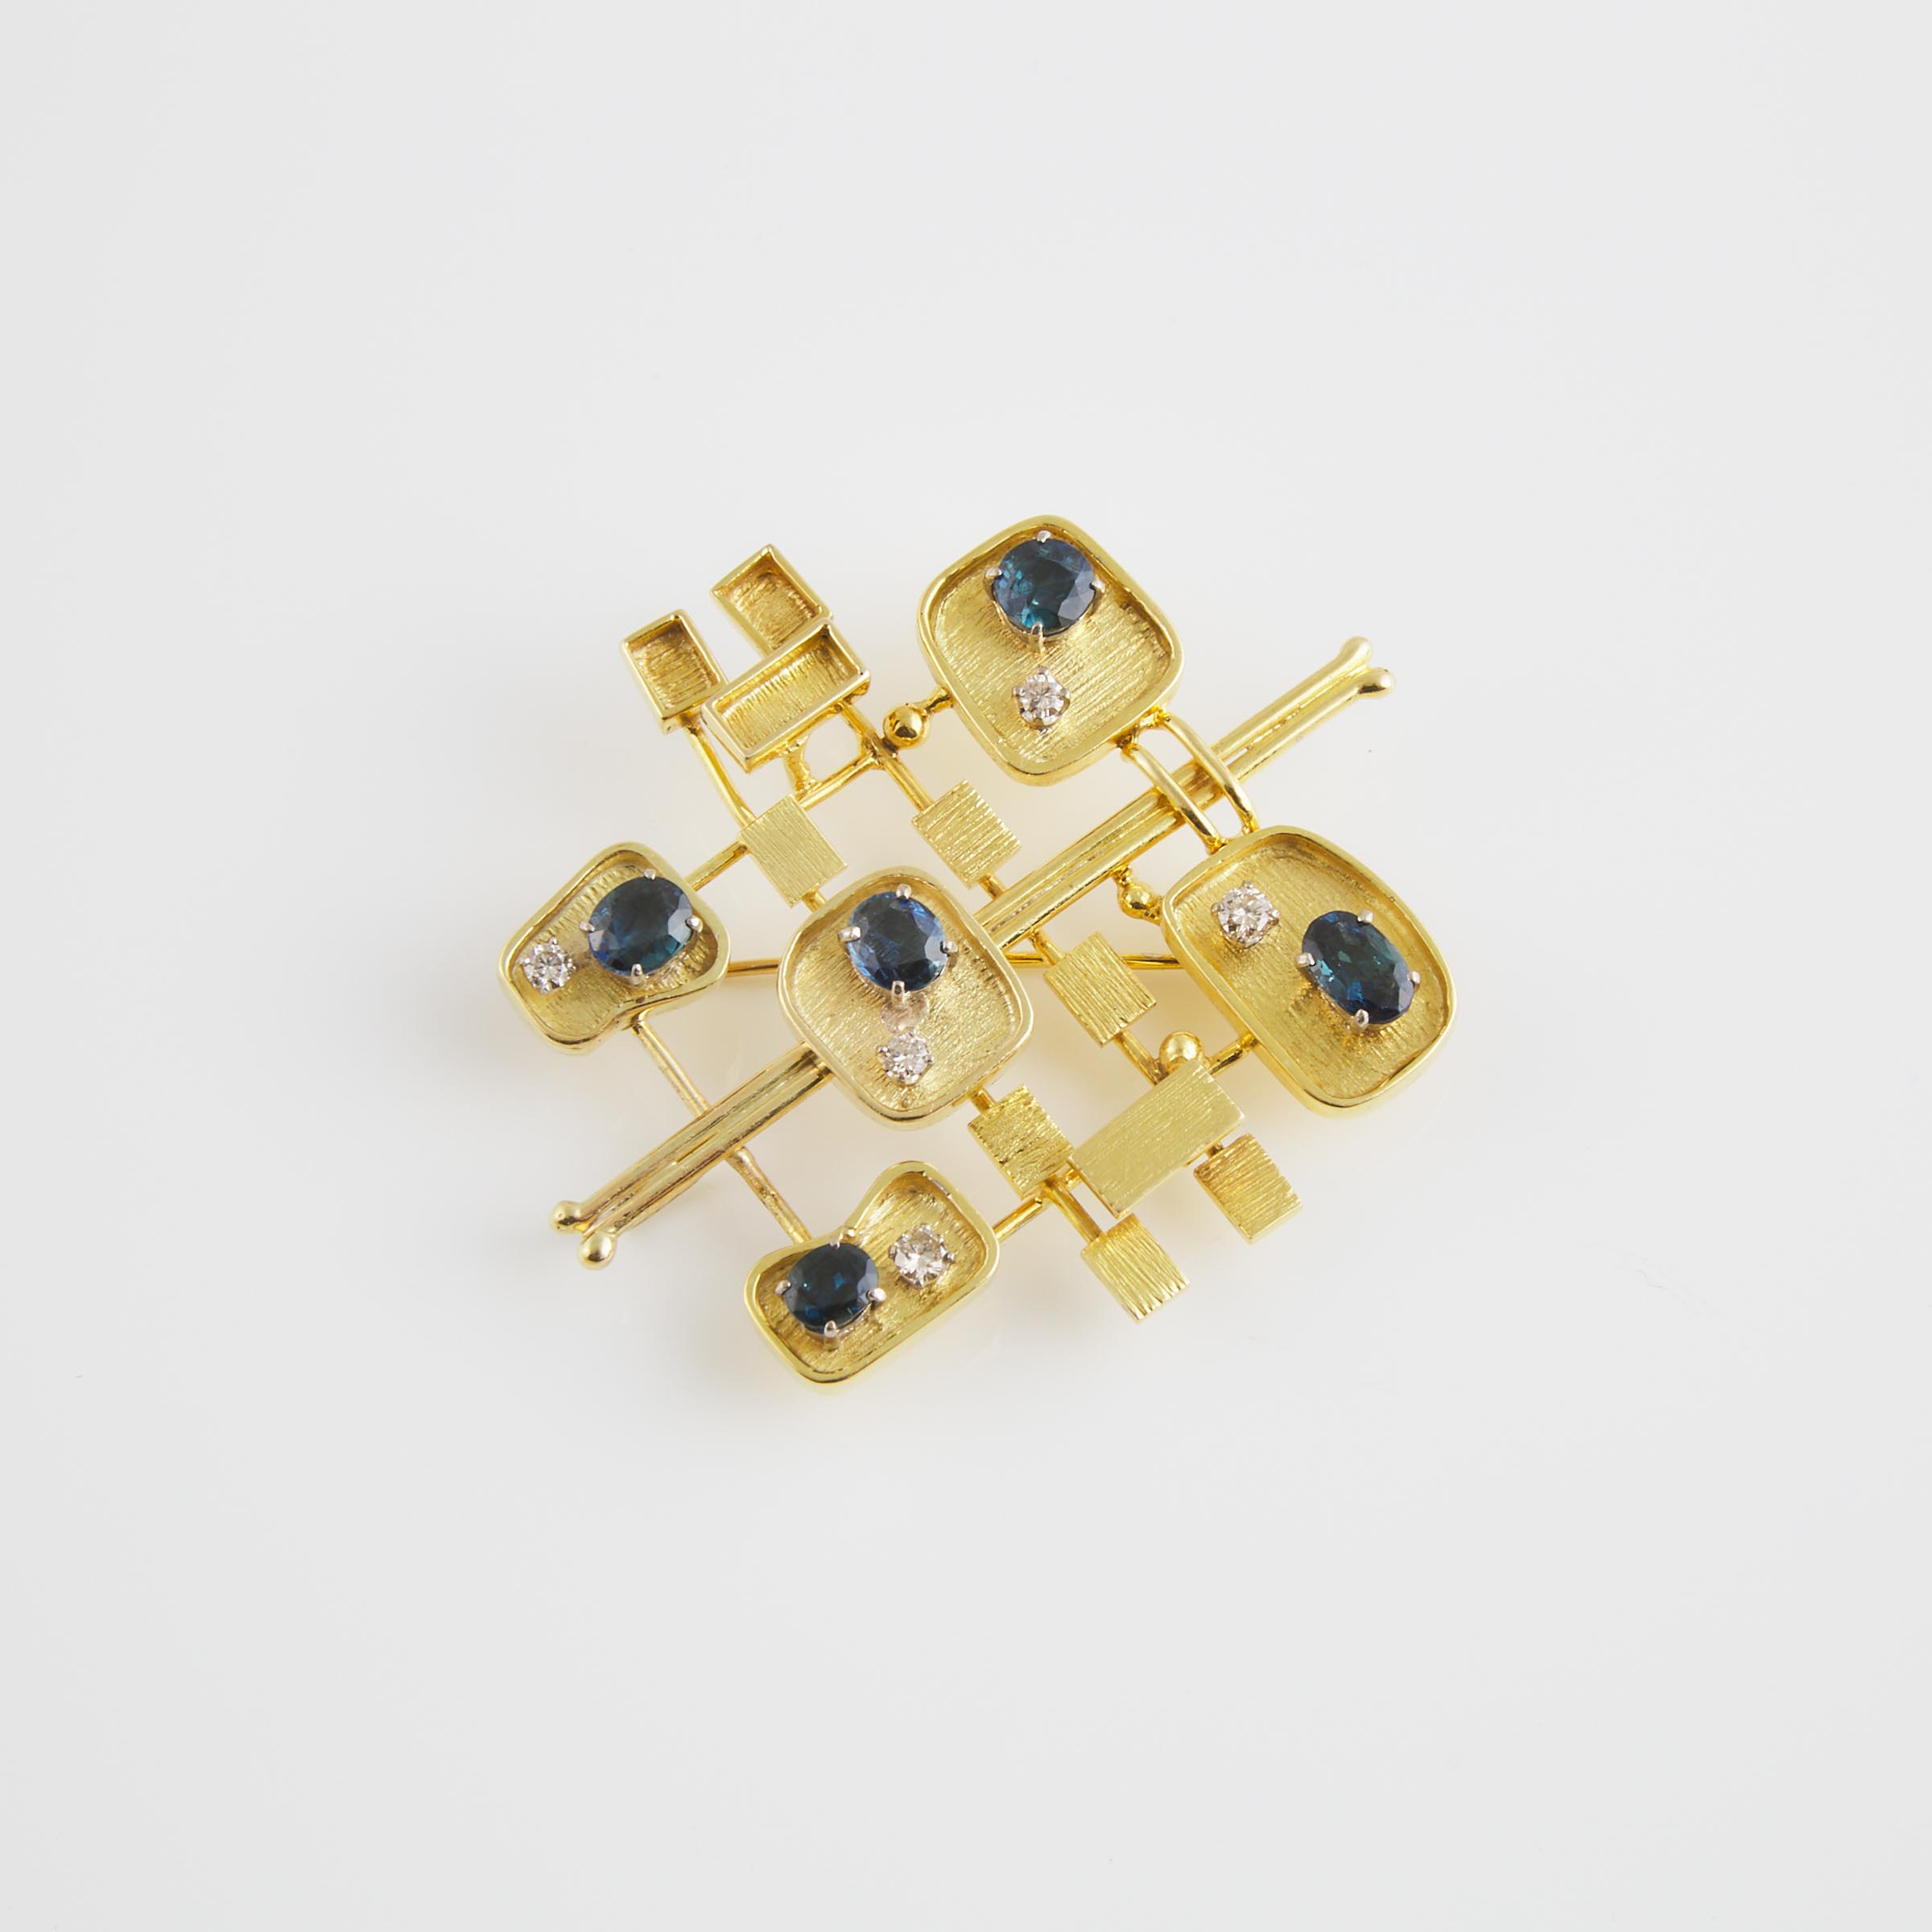 18k Yellow Gold Abstract Brooch/Pendant